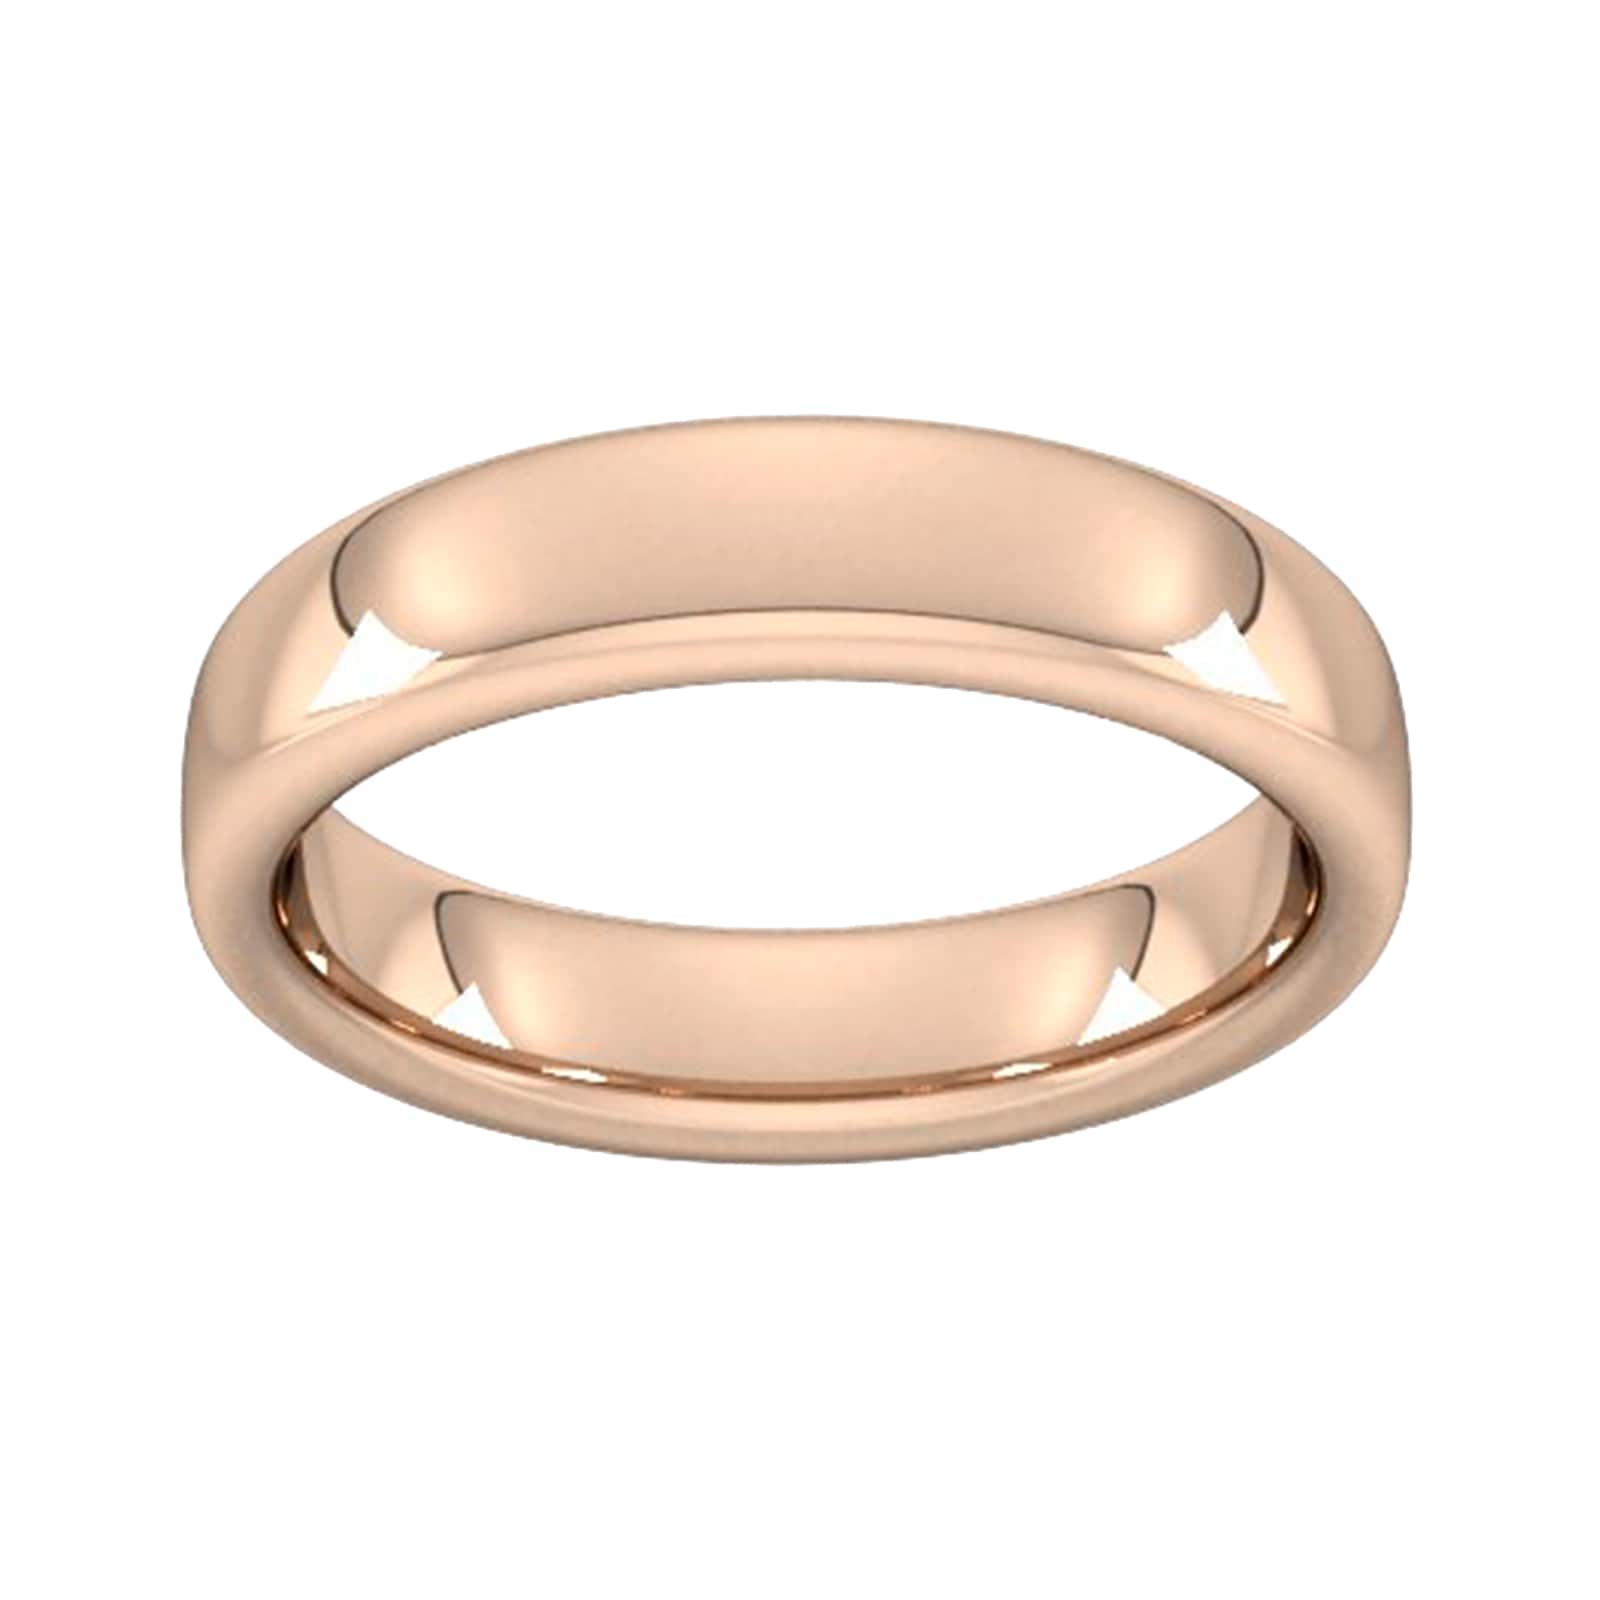 5mm Slight Court Extra Heavy Wedding Ring In 18 Carat Rose Gold - Ring Size R